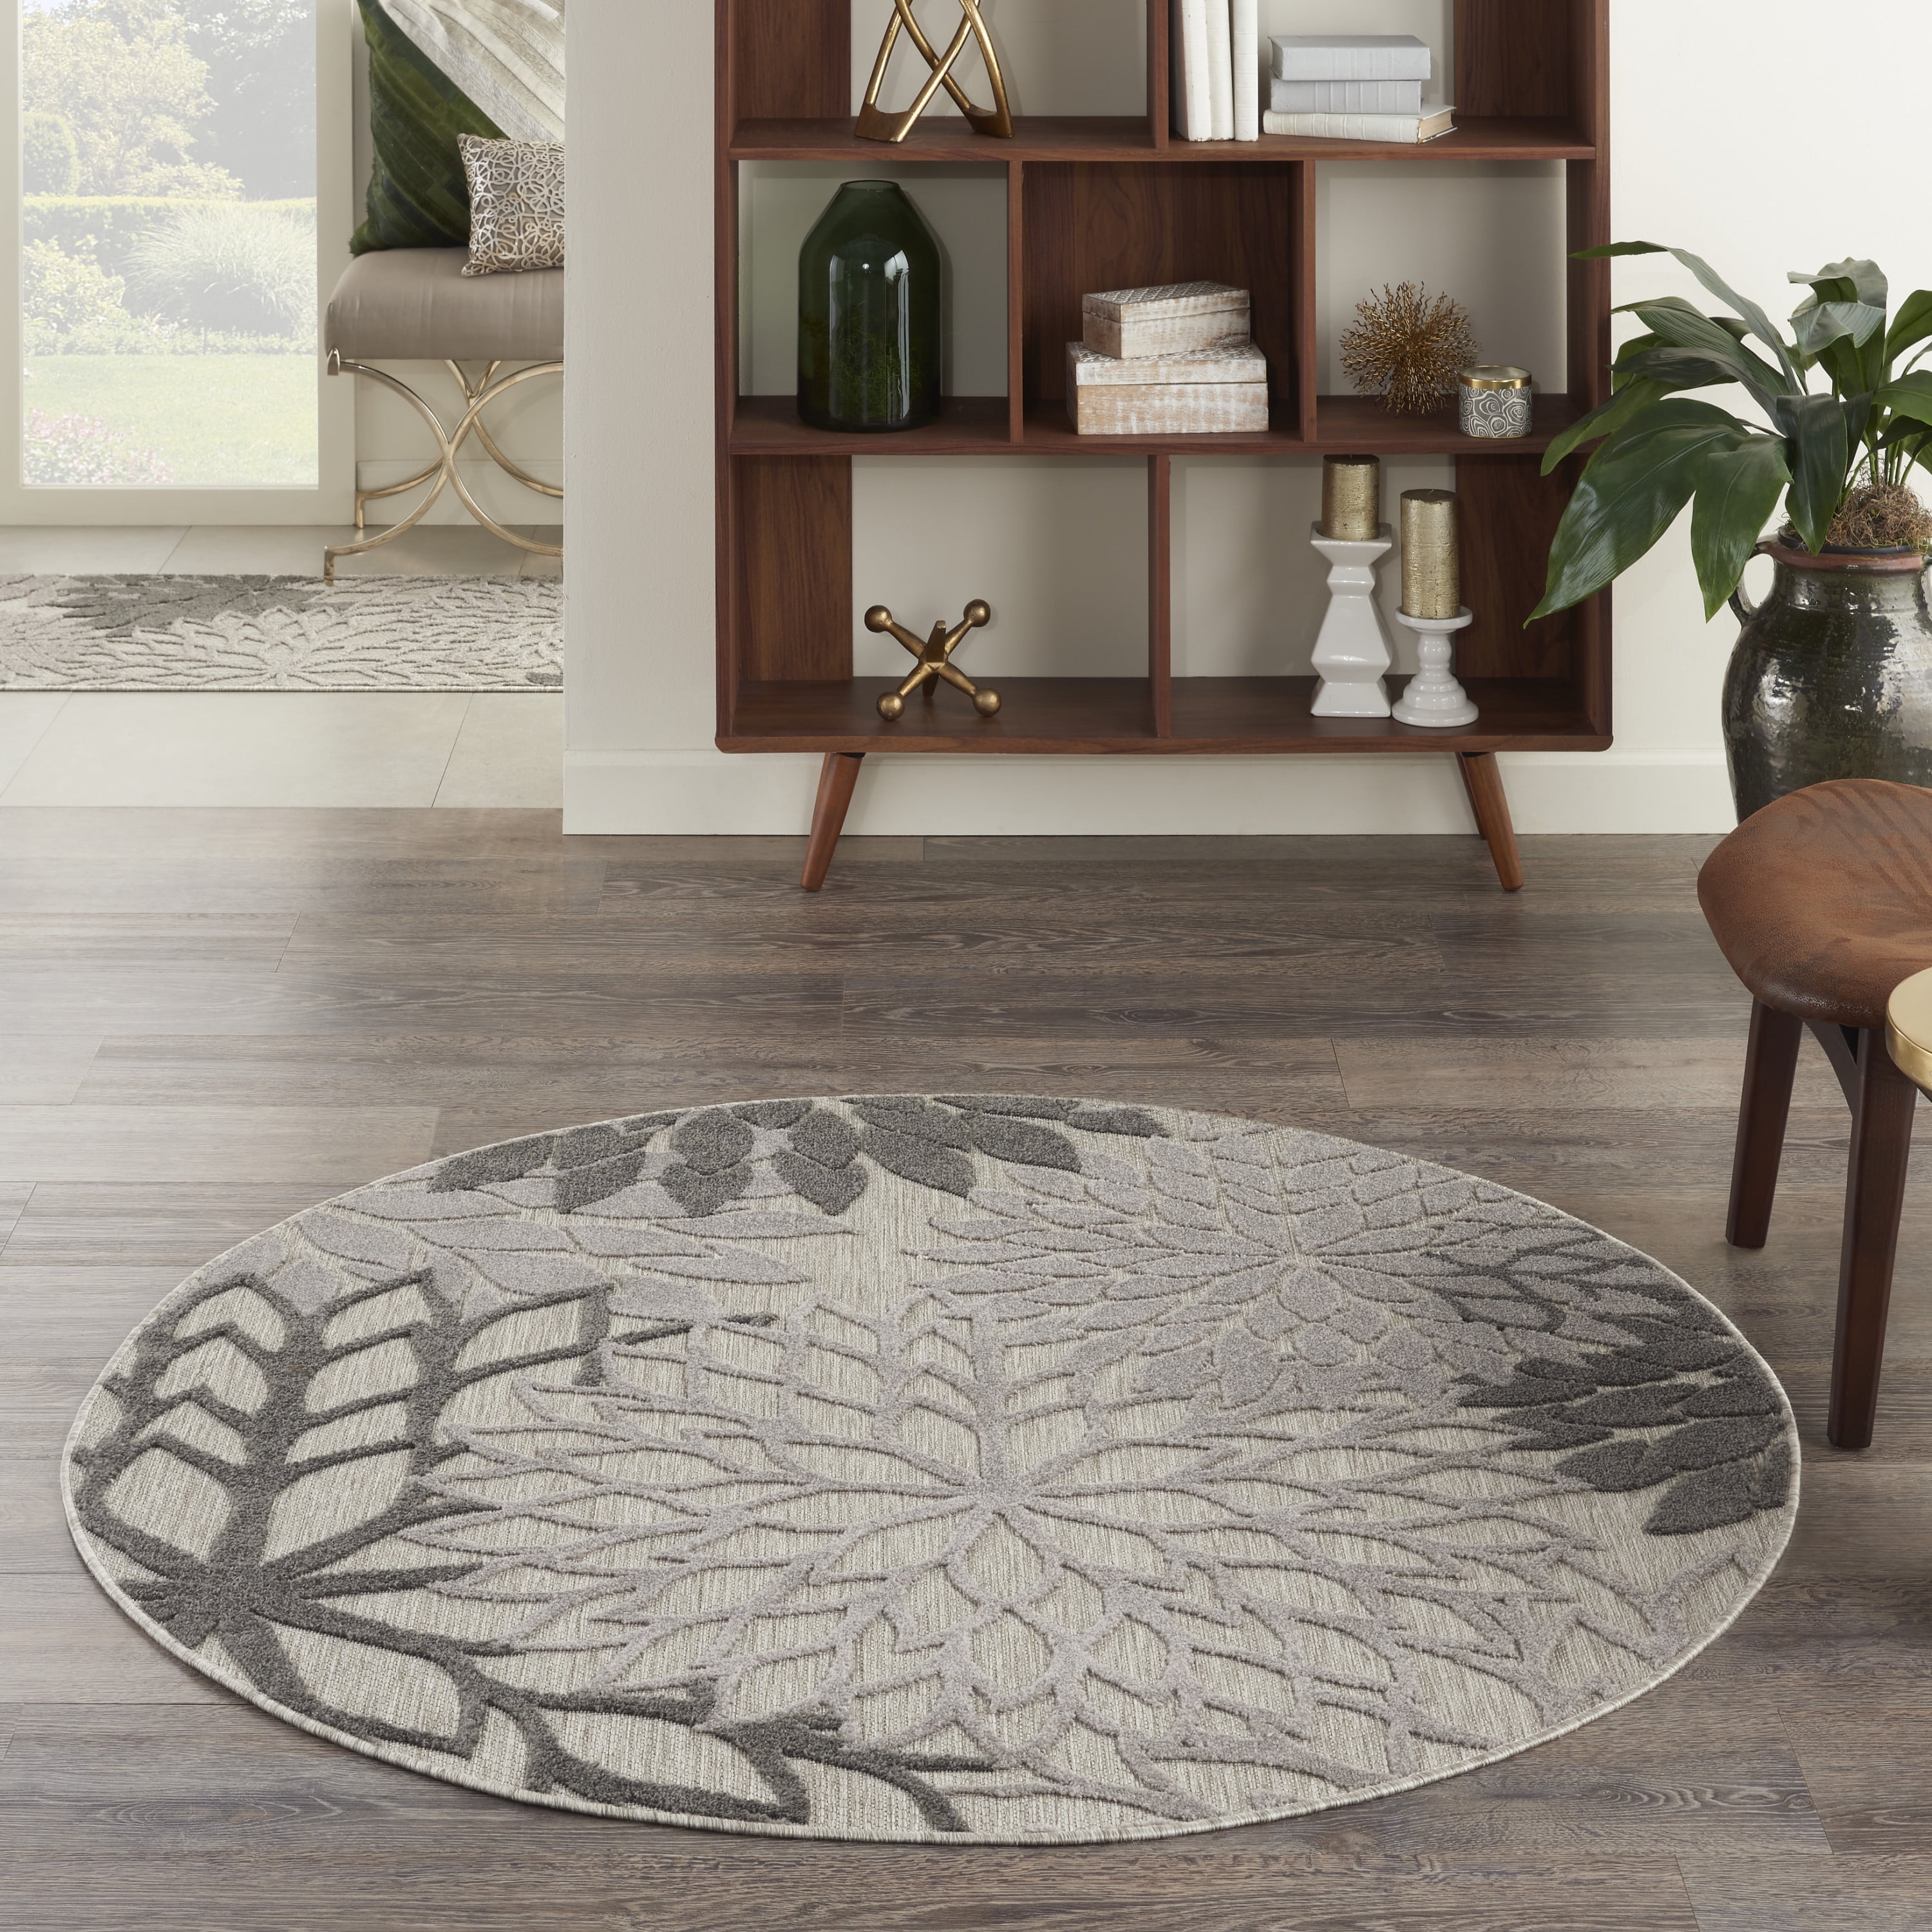 Rain Forest Tropical Leaves Parrot Round Floor Mat Bedroom Living Room Area Rugs